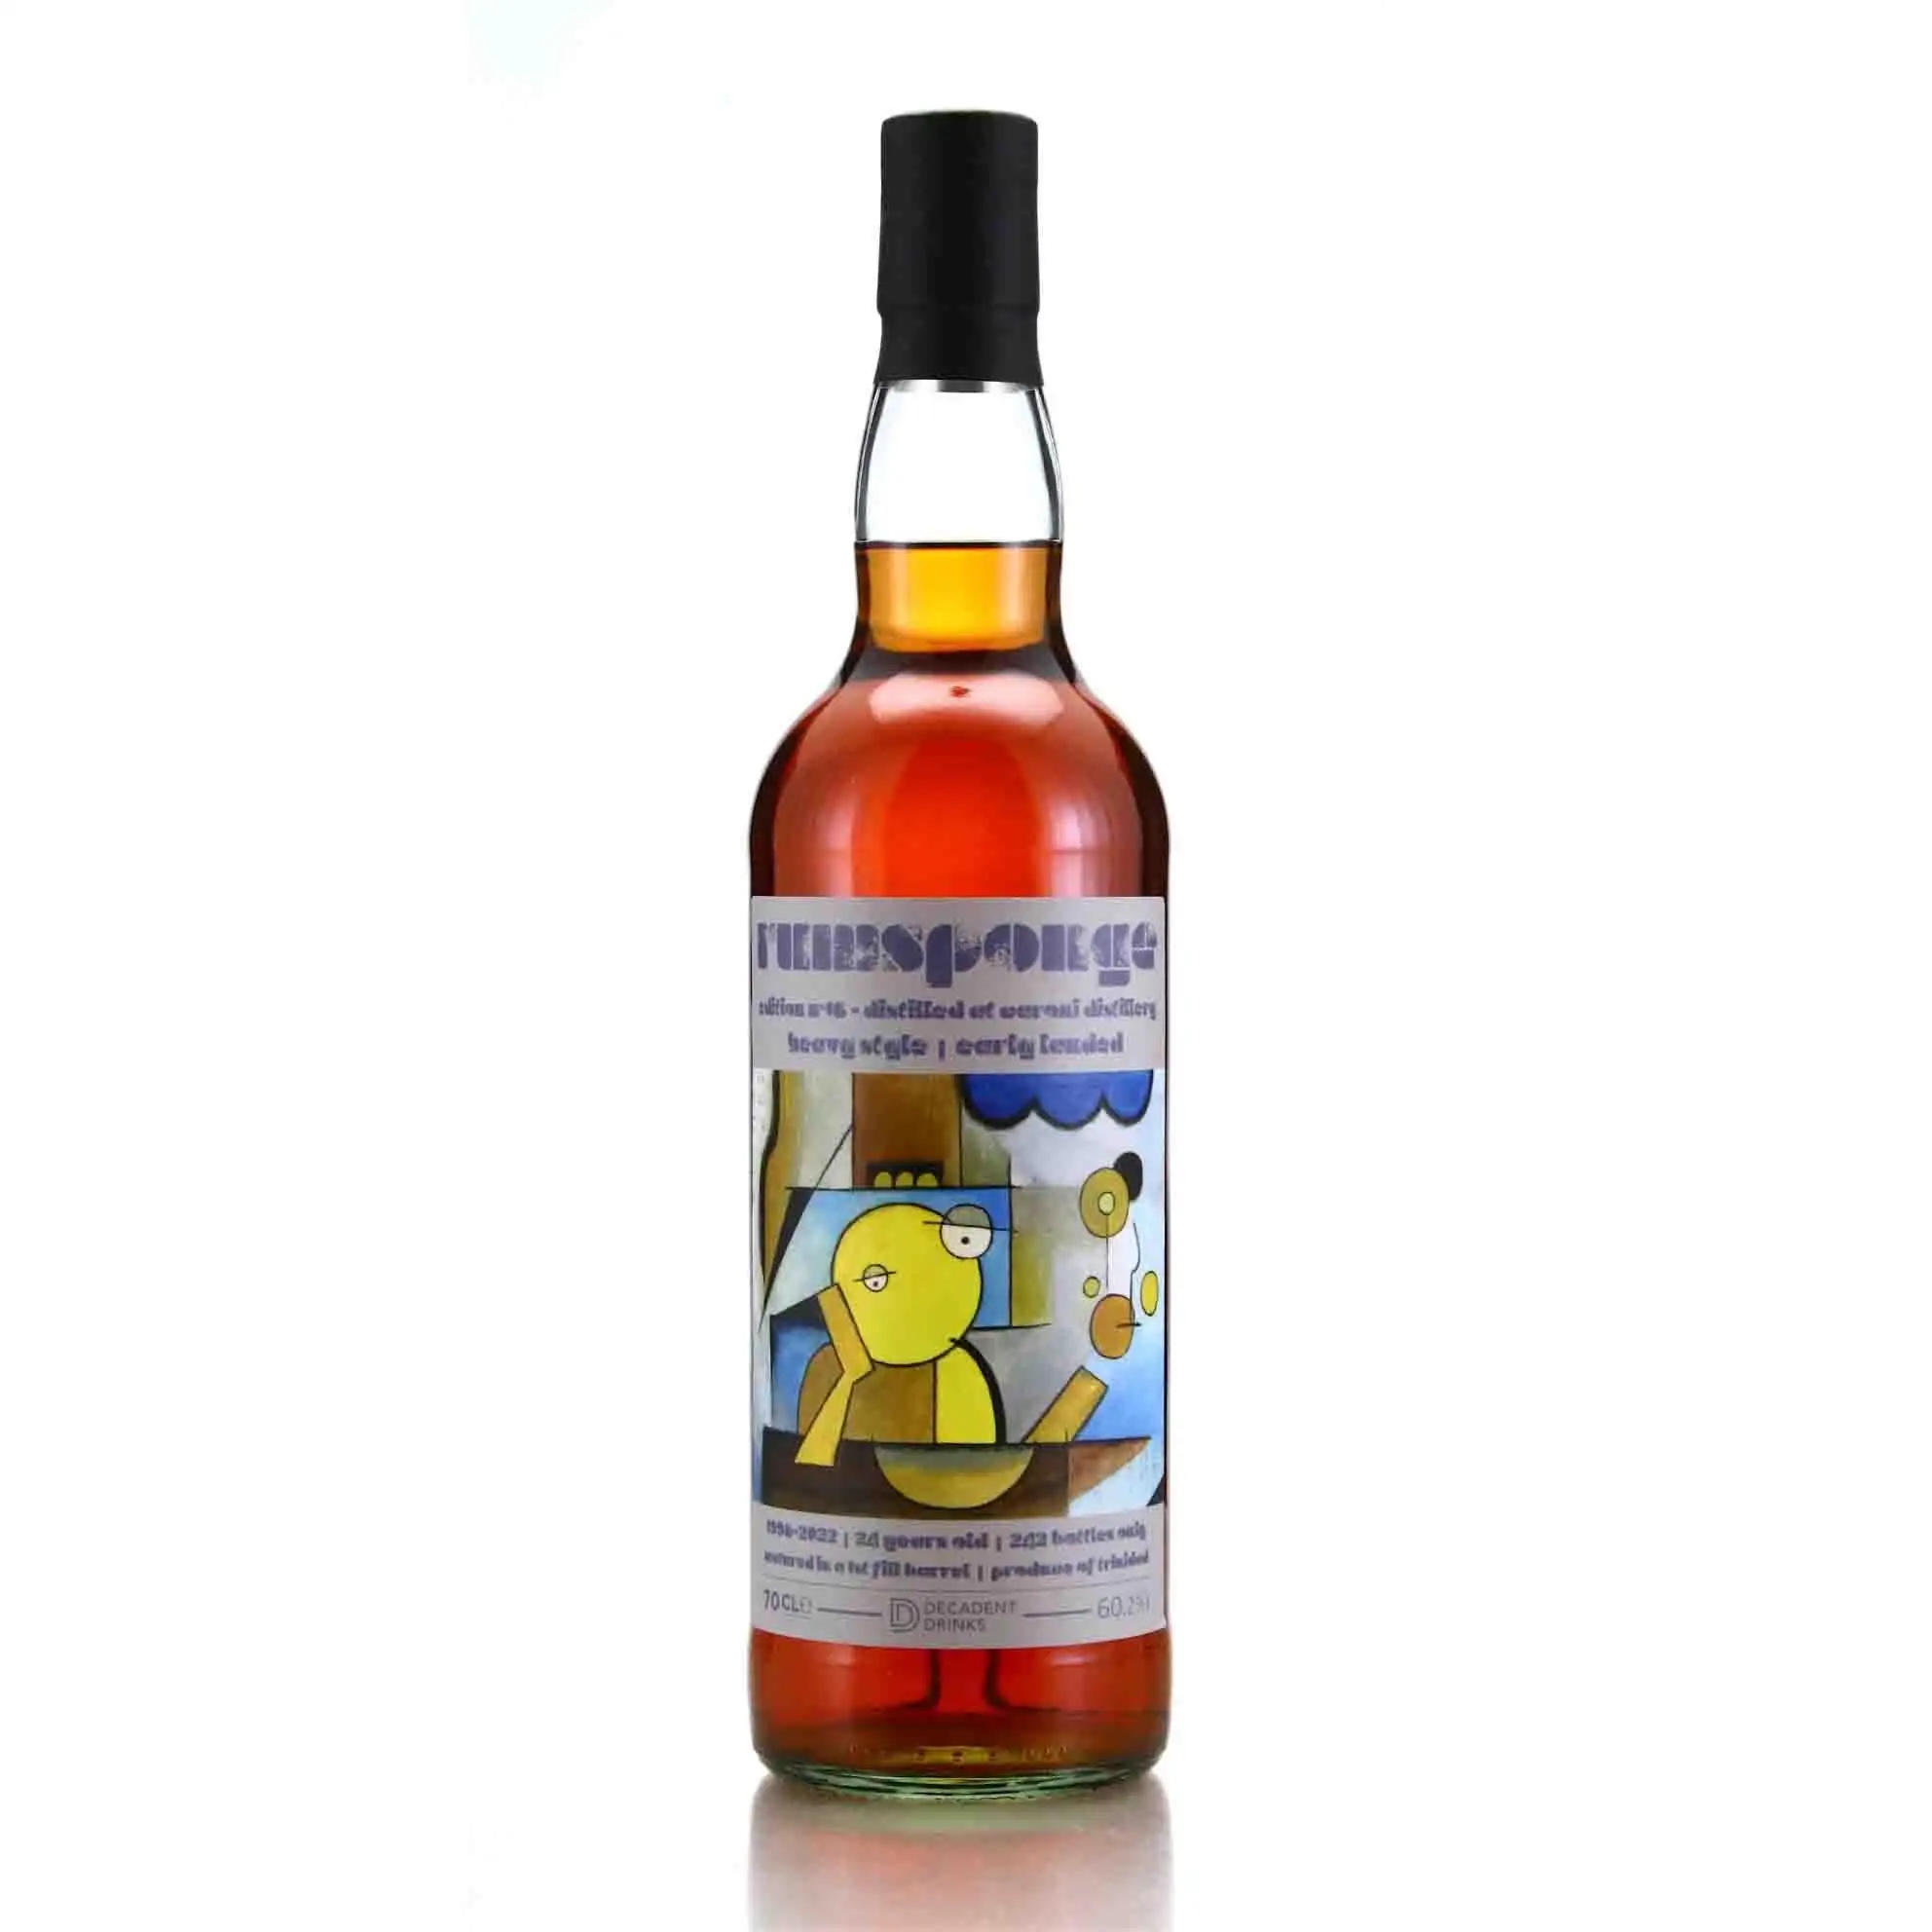 Image of the front of the bottle of the rum Rum Sponge No. 16